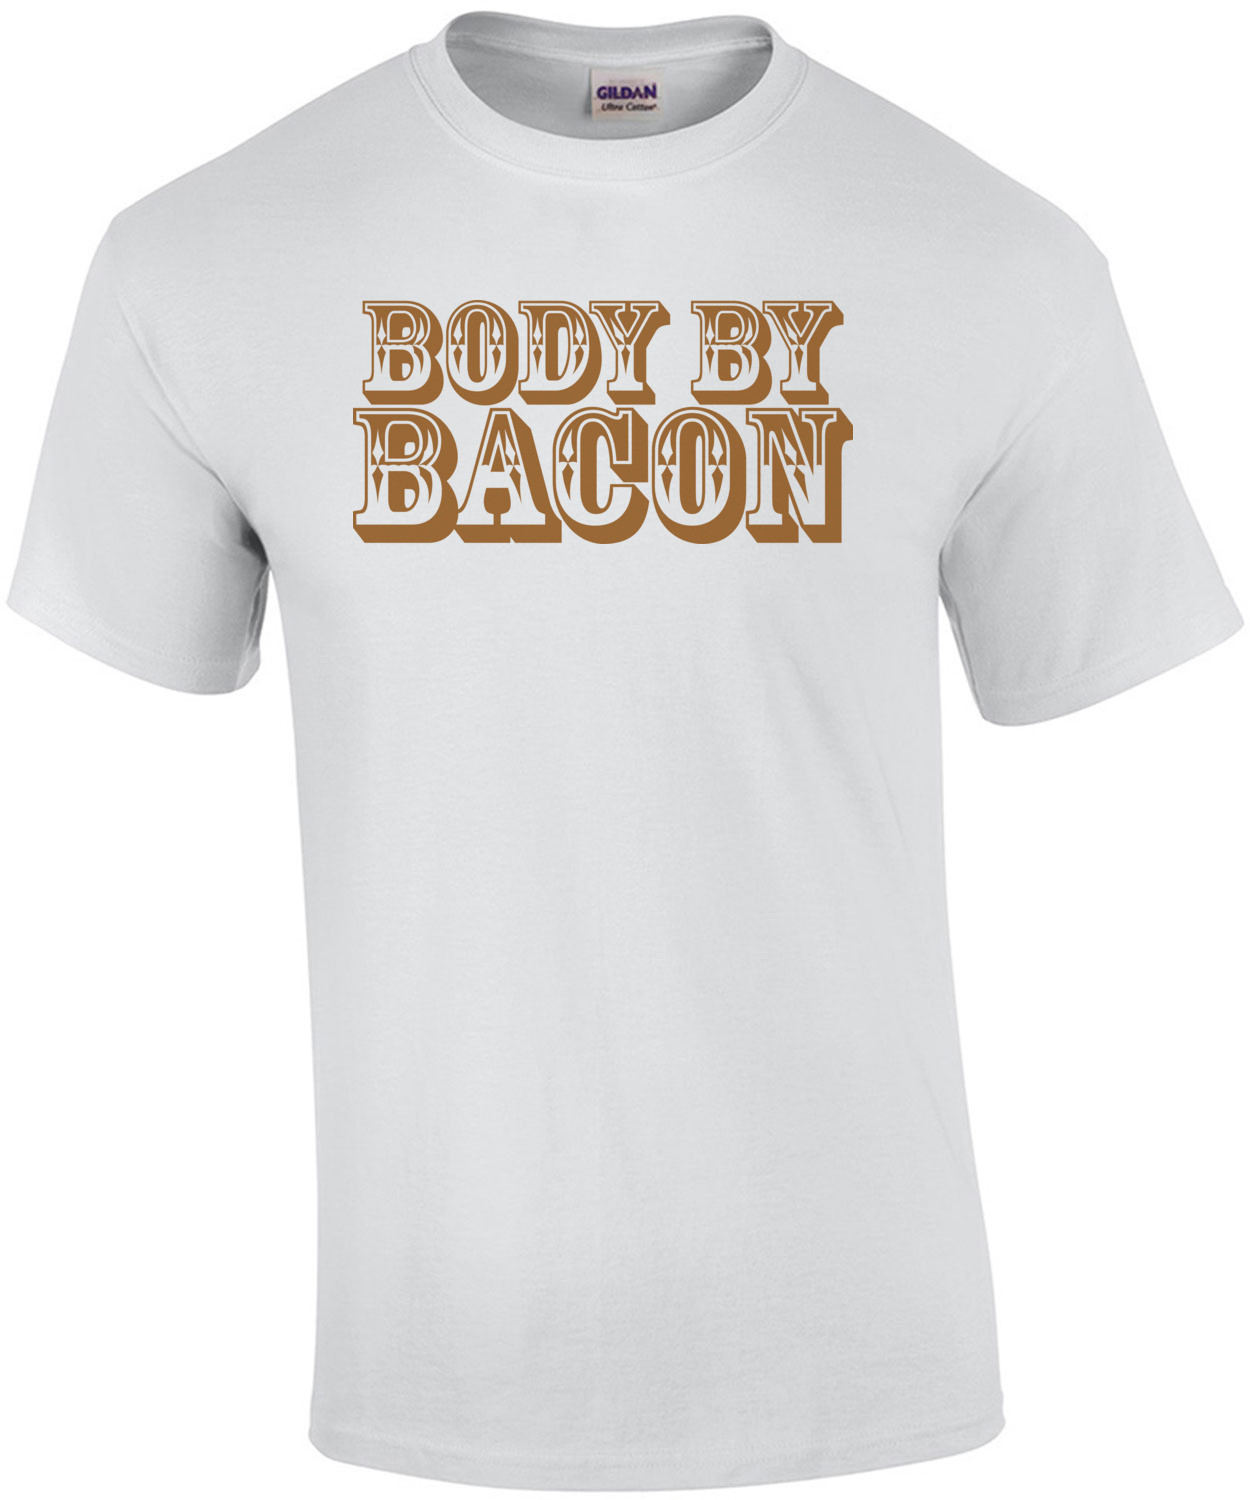 Body, By Bacon Shirt